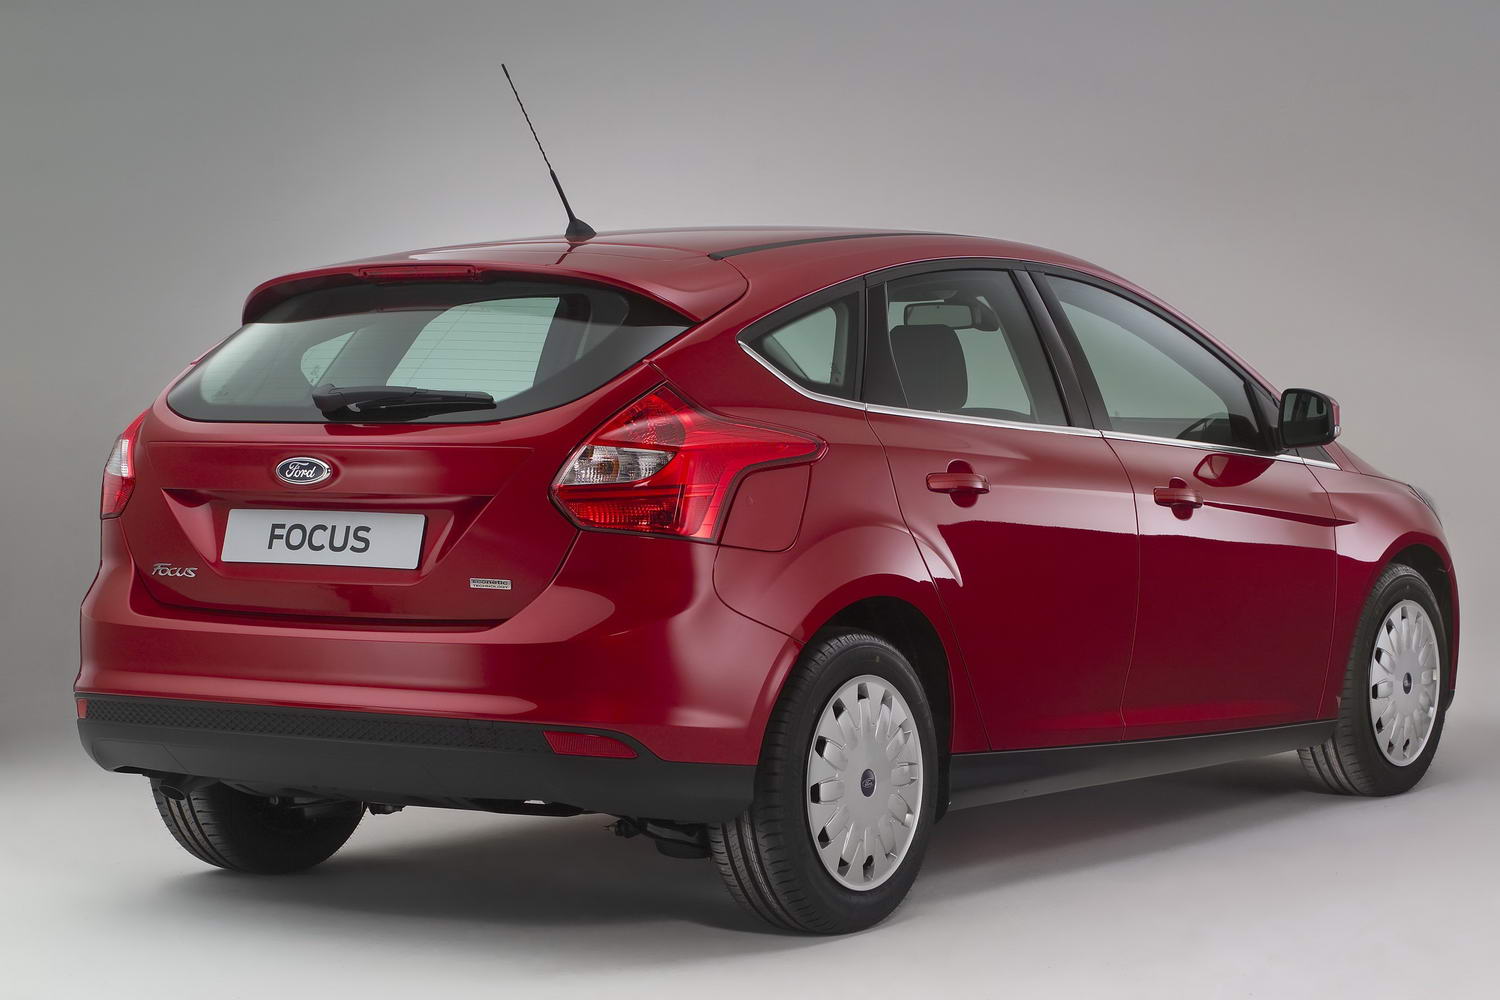 Used Ford Focus buying guide: 2004-2011 (Mk2); 2011-2018 (Mk3